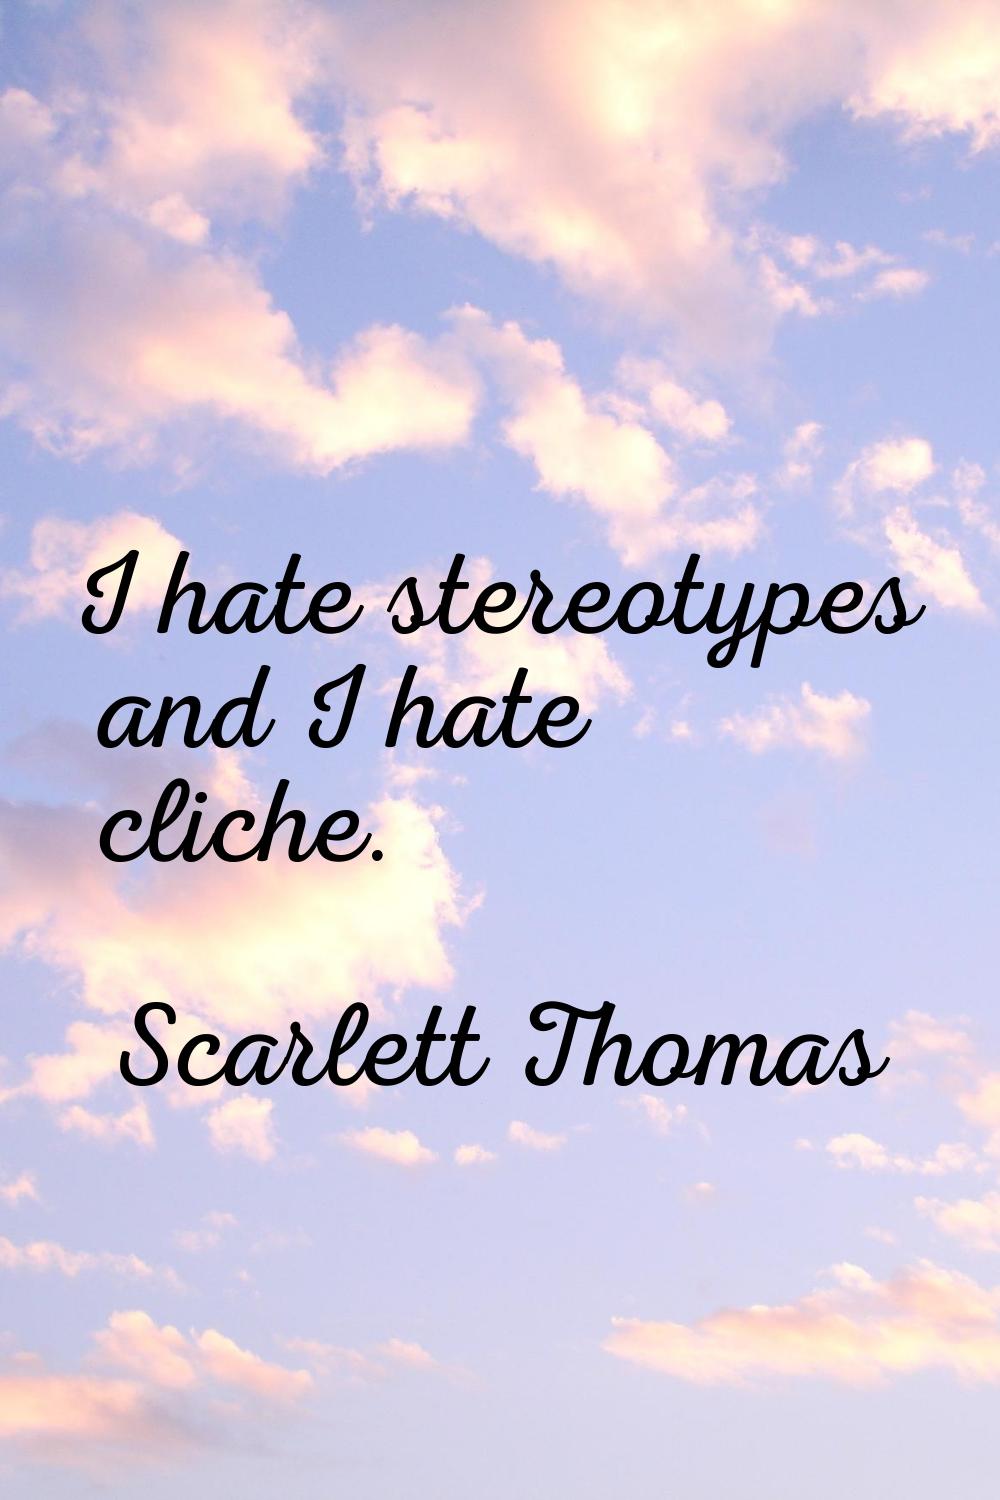 I hate stereotypes and I hate cliche.